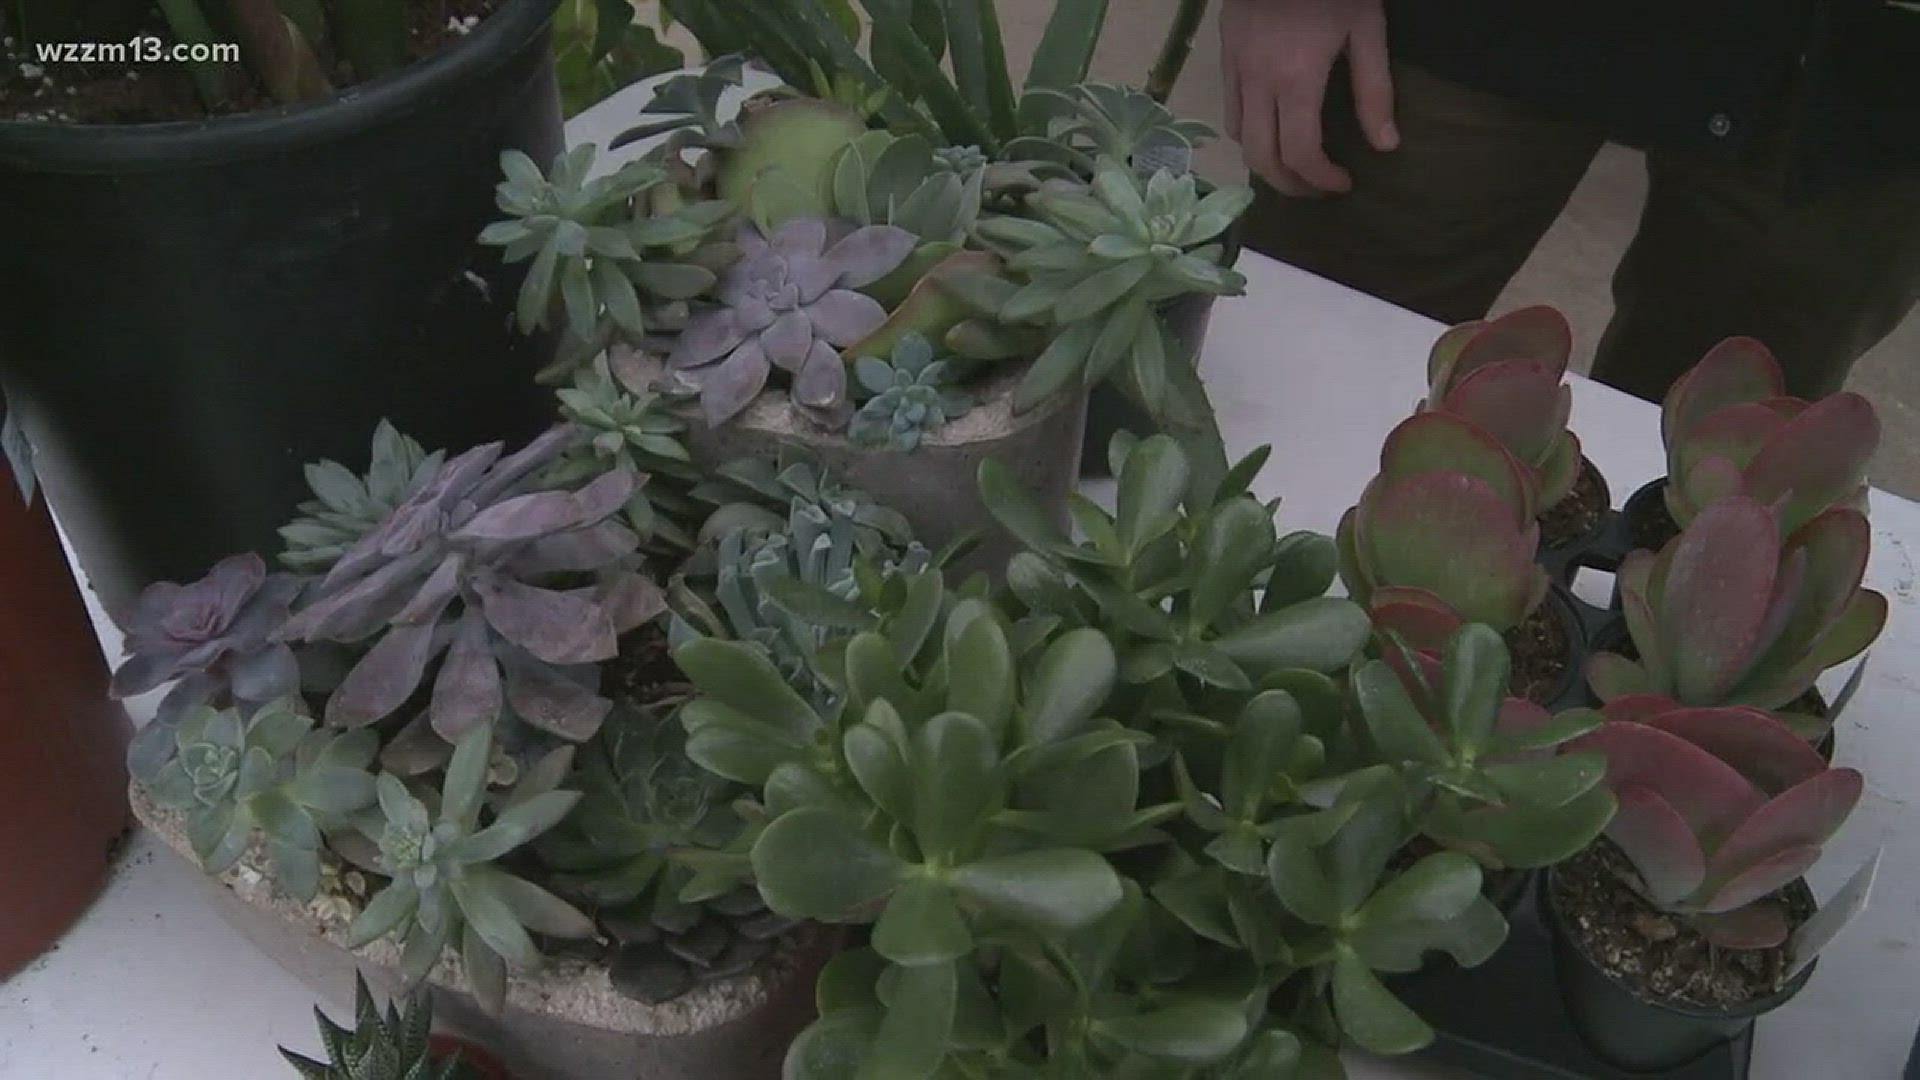 Greenthumb: Brighten your home with plants